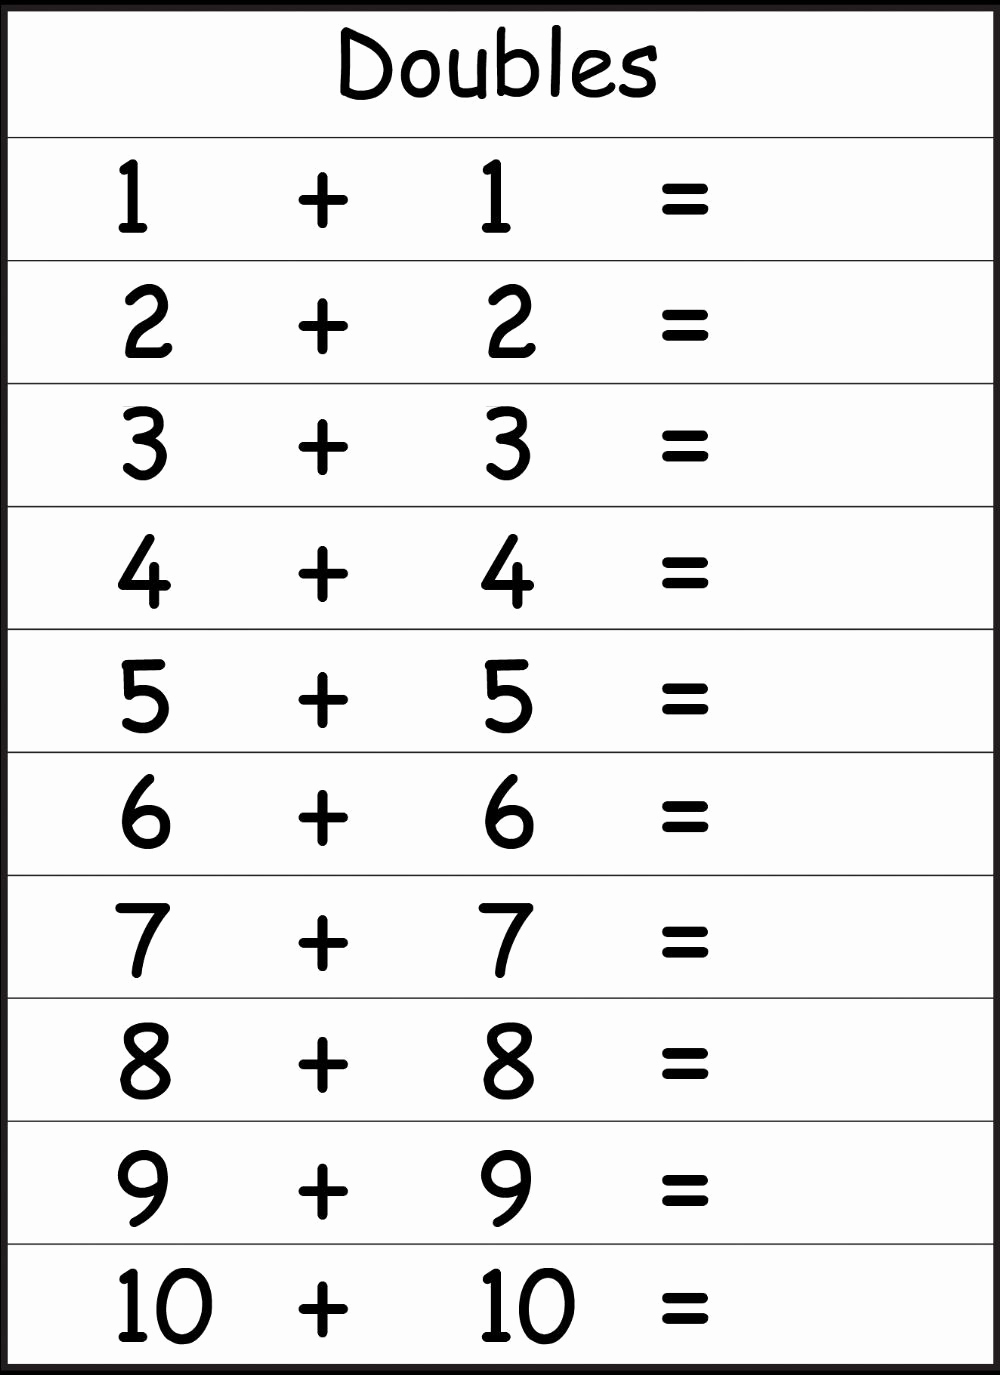 Doubles Addition Worksheet Luxury 30 Addition Doubles Worksheet